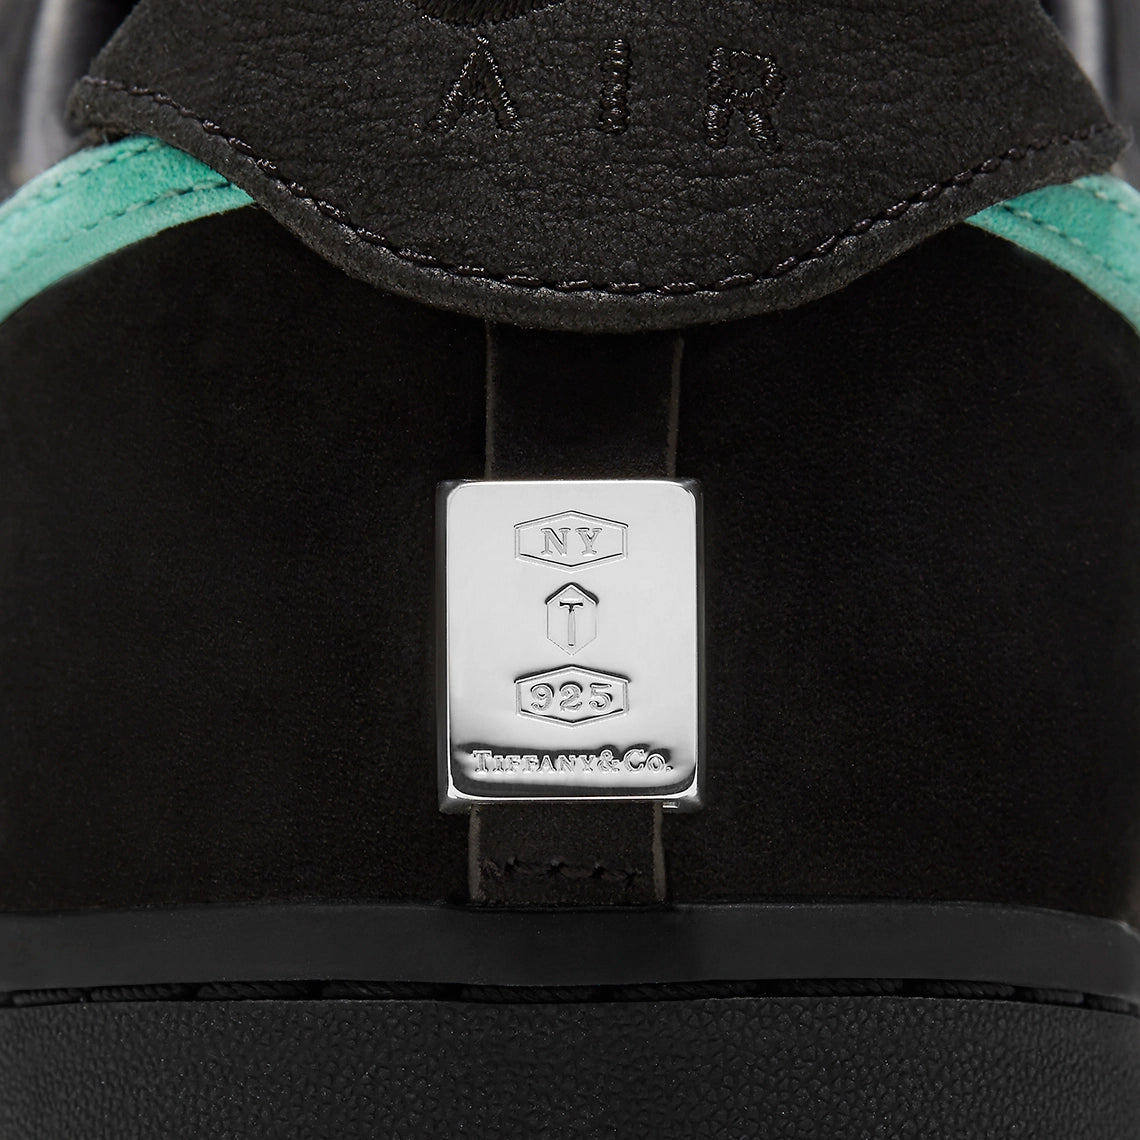 Air Force 1 "Tiffany And Co."